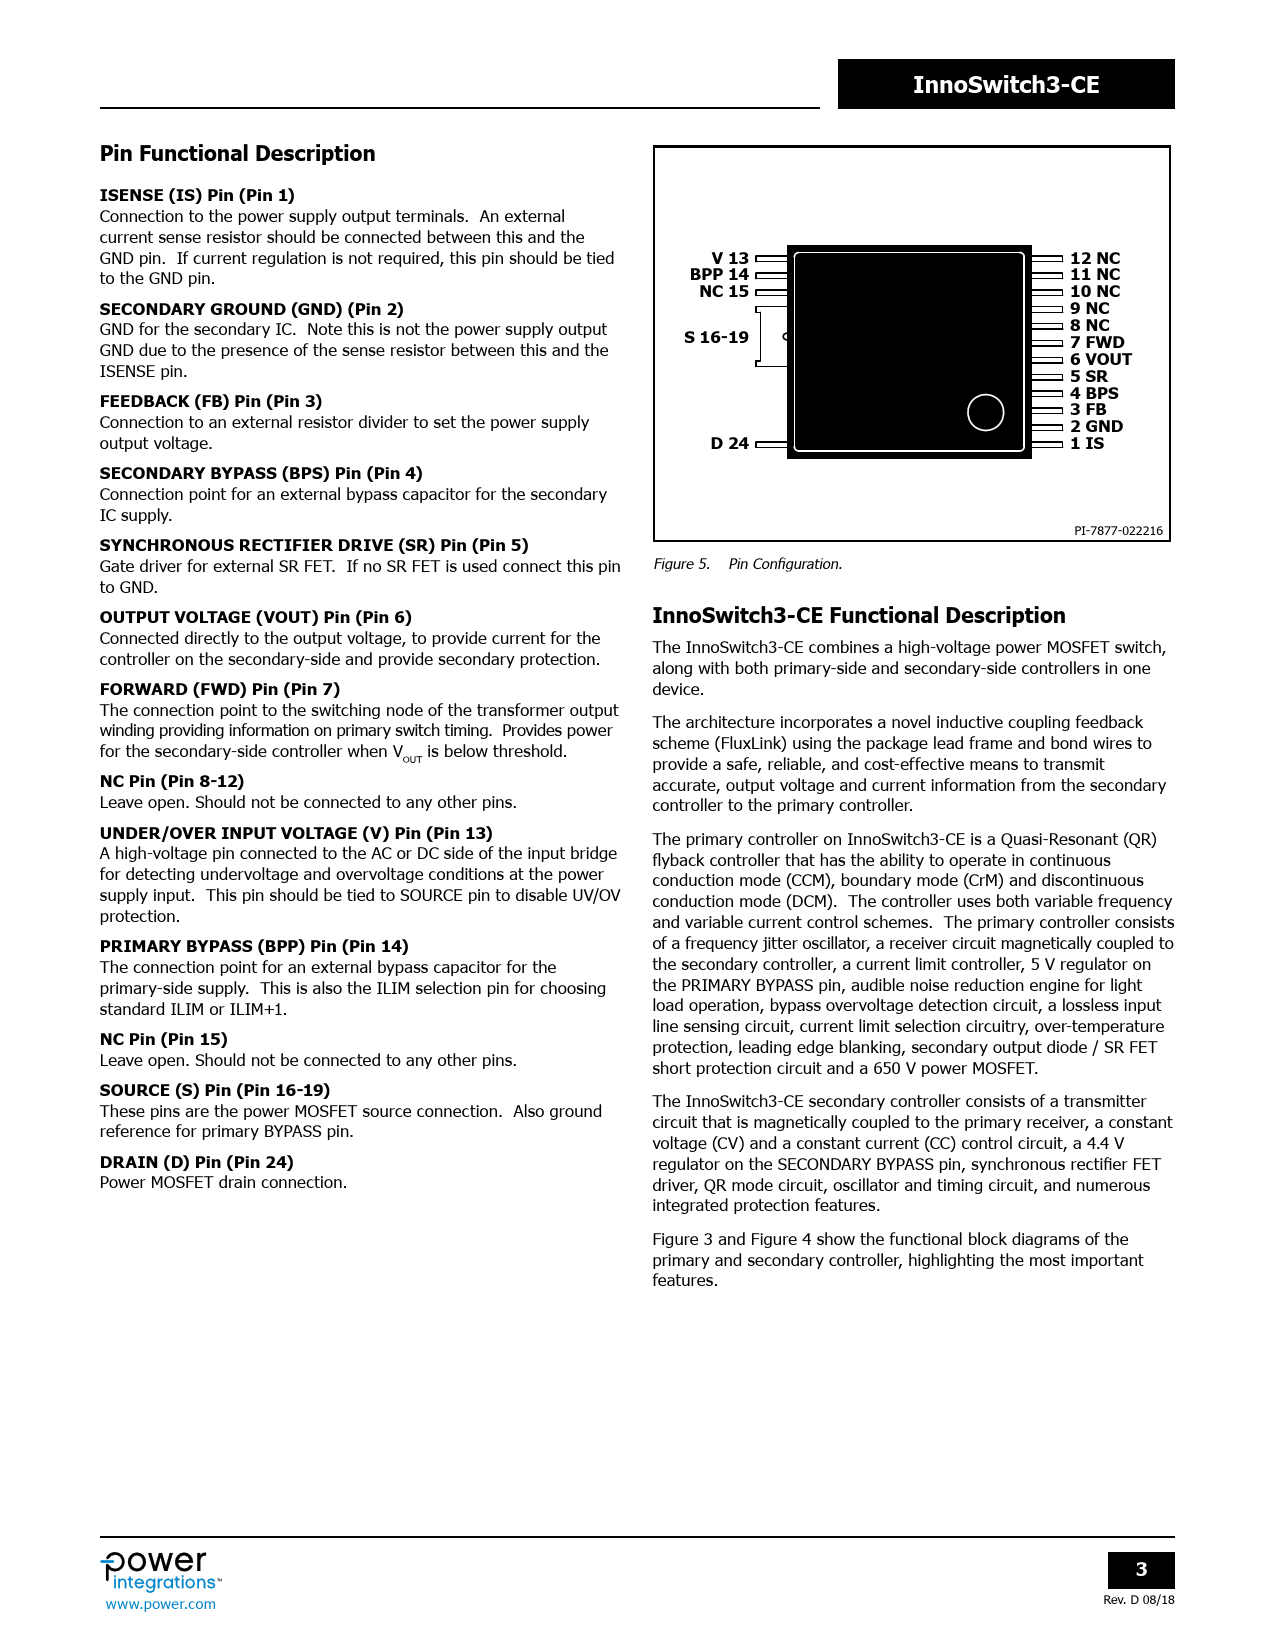 InnoSwitch3-CE. Pin Functional Description. ISENSE (IS) Pin (Pin 1). V 13.  12 NC. BPP 14. 11 NC. NC 15. 10 NC - Datasheet InnoSwitch3-CE Power  Integrations